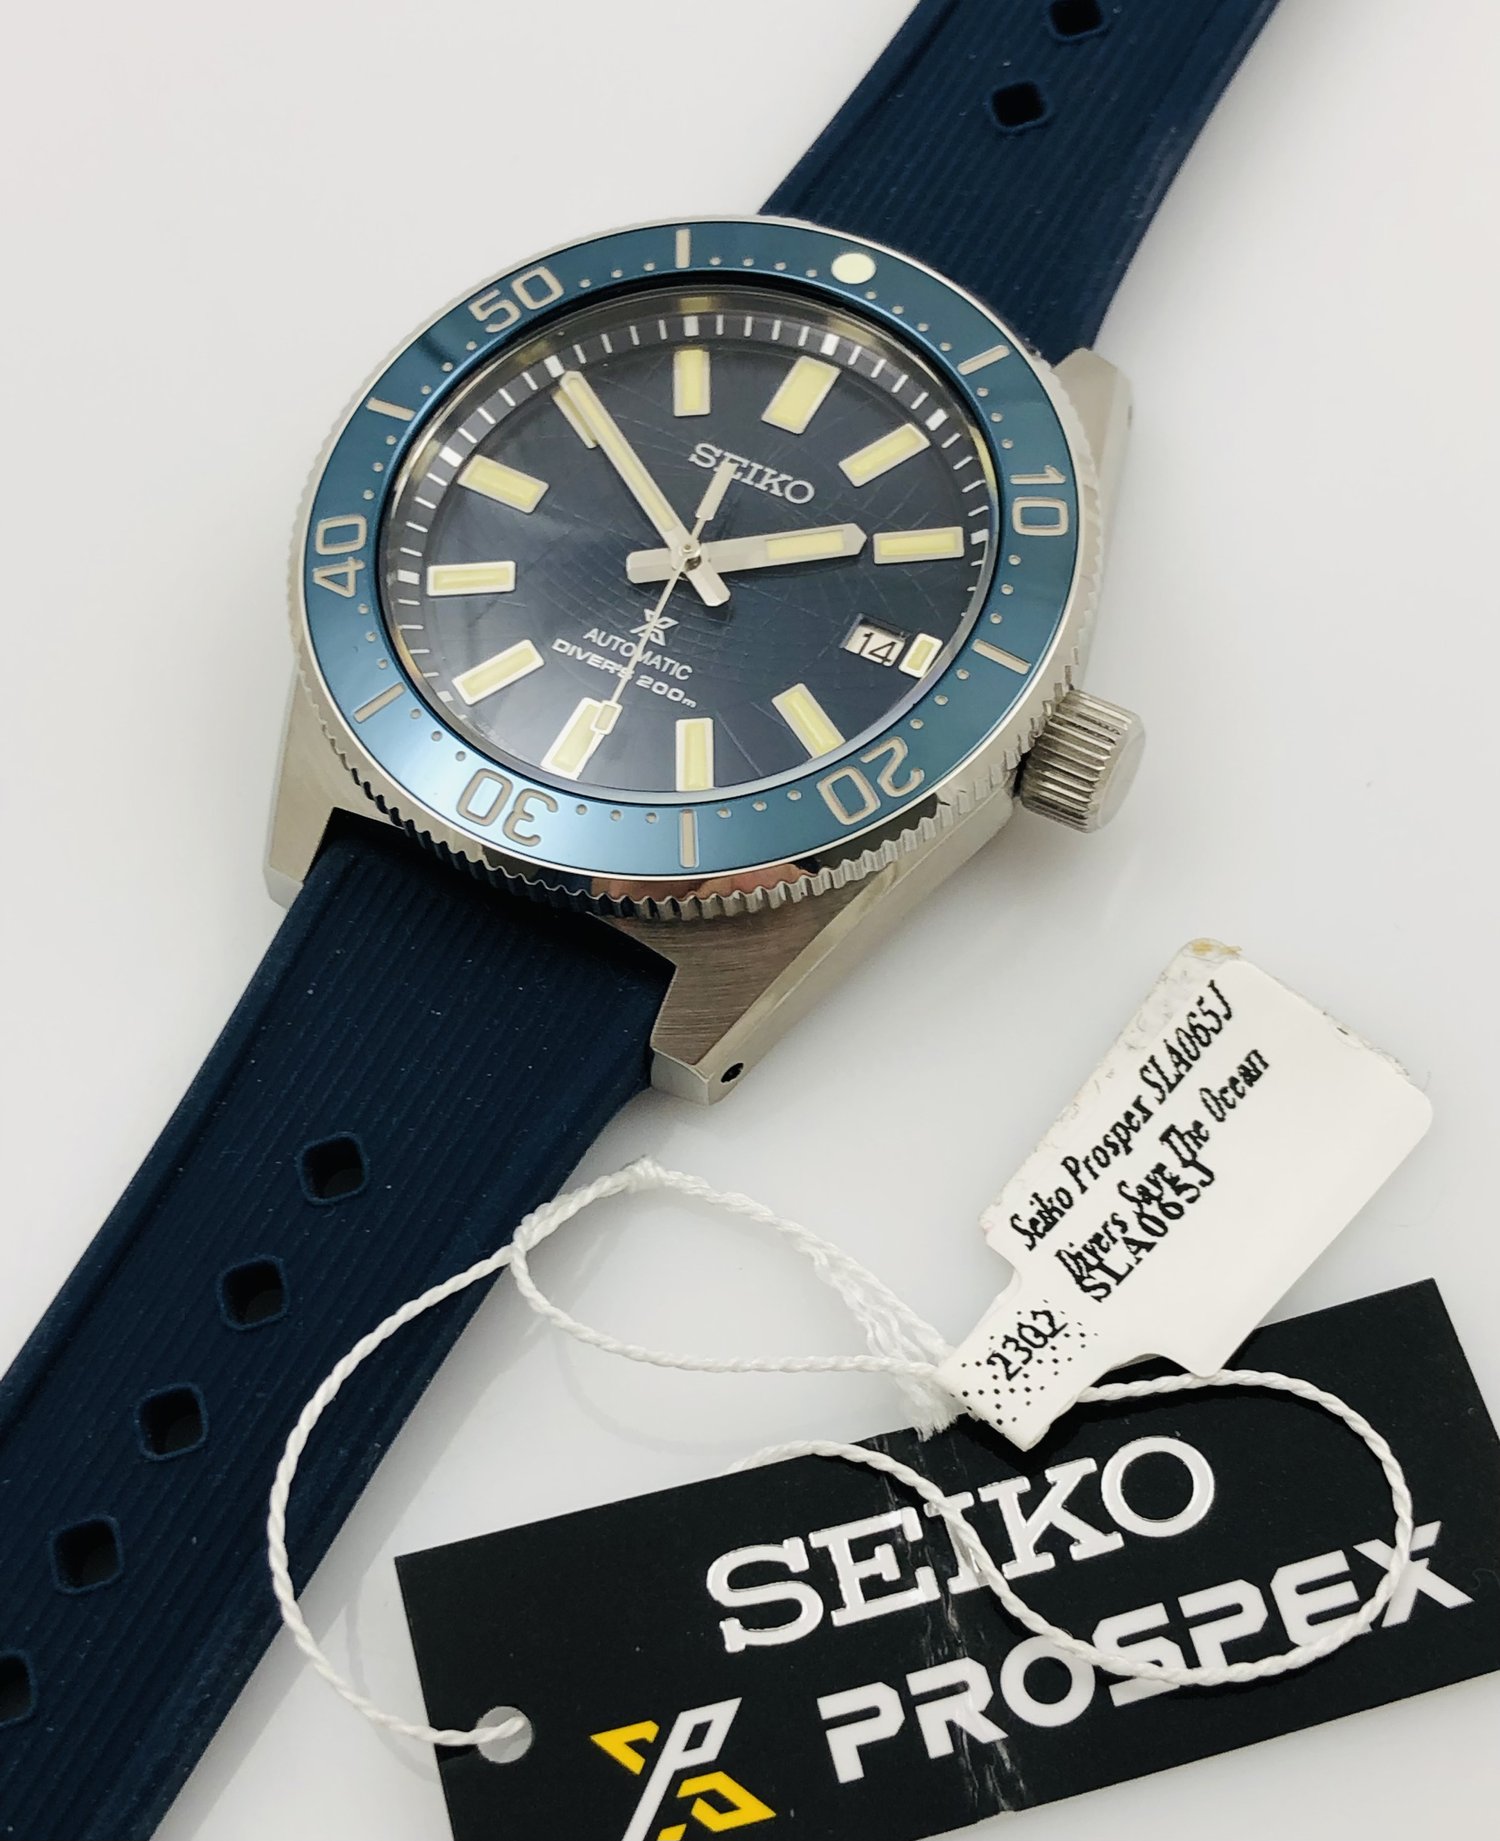 Seiko Prospex Diver 200M SAVE THE OCEAN 1965 Limited Edition of 1300 pieces  Stainless Steel Mens Wristwatch purchased in March 2023 Ref SLA065J NEW  UNWORN with Box, Tags and Certificate. — About Time